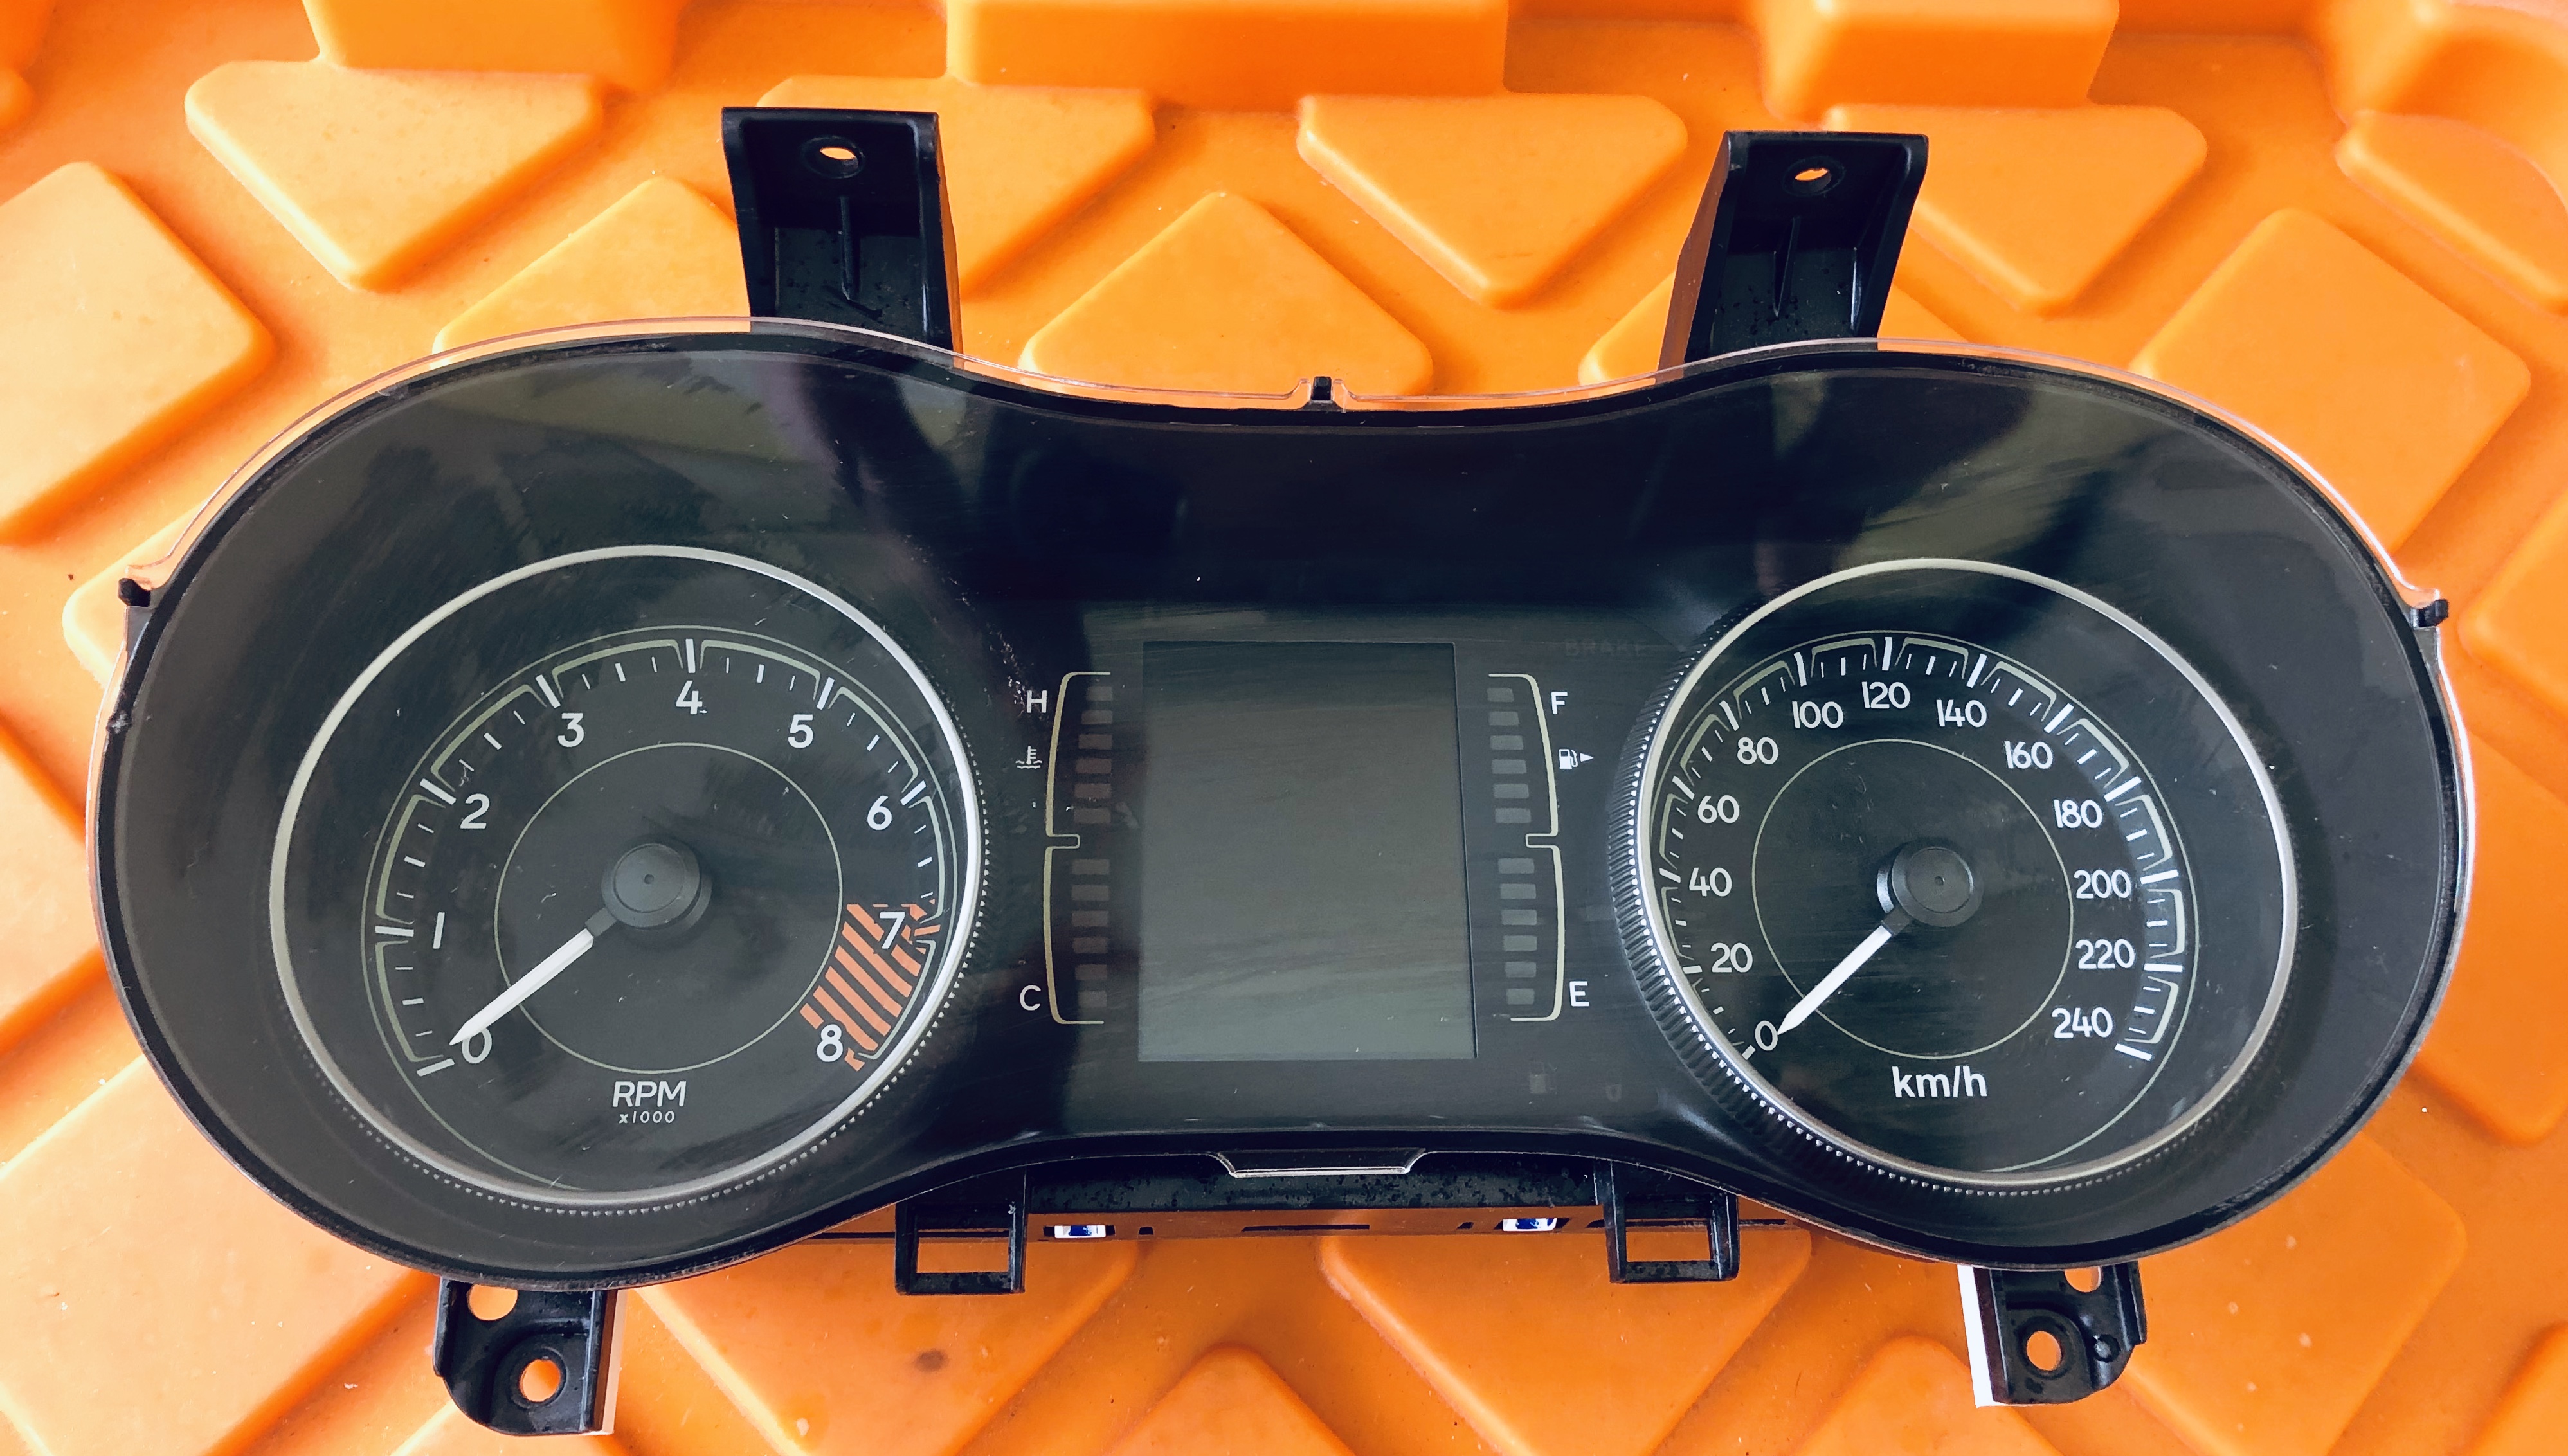 2014 JEEP CHEROKEE USED INSTRUMENT CLUSTER FOR SALE (KM/H